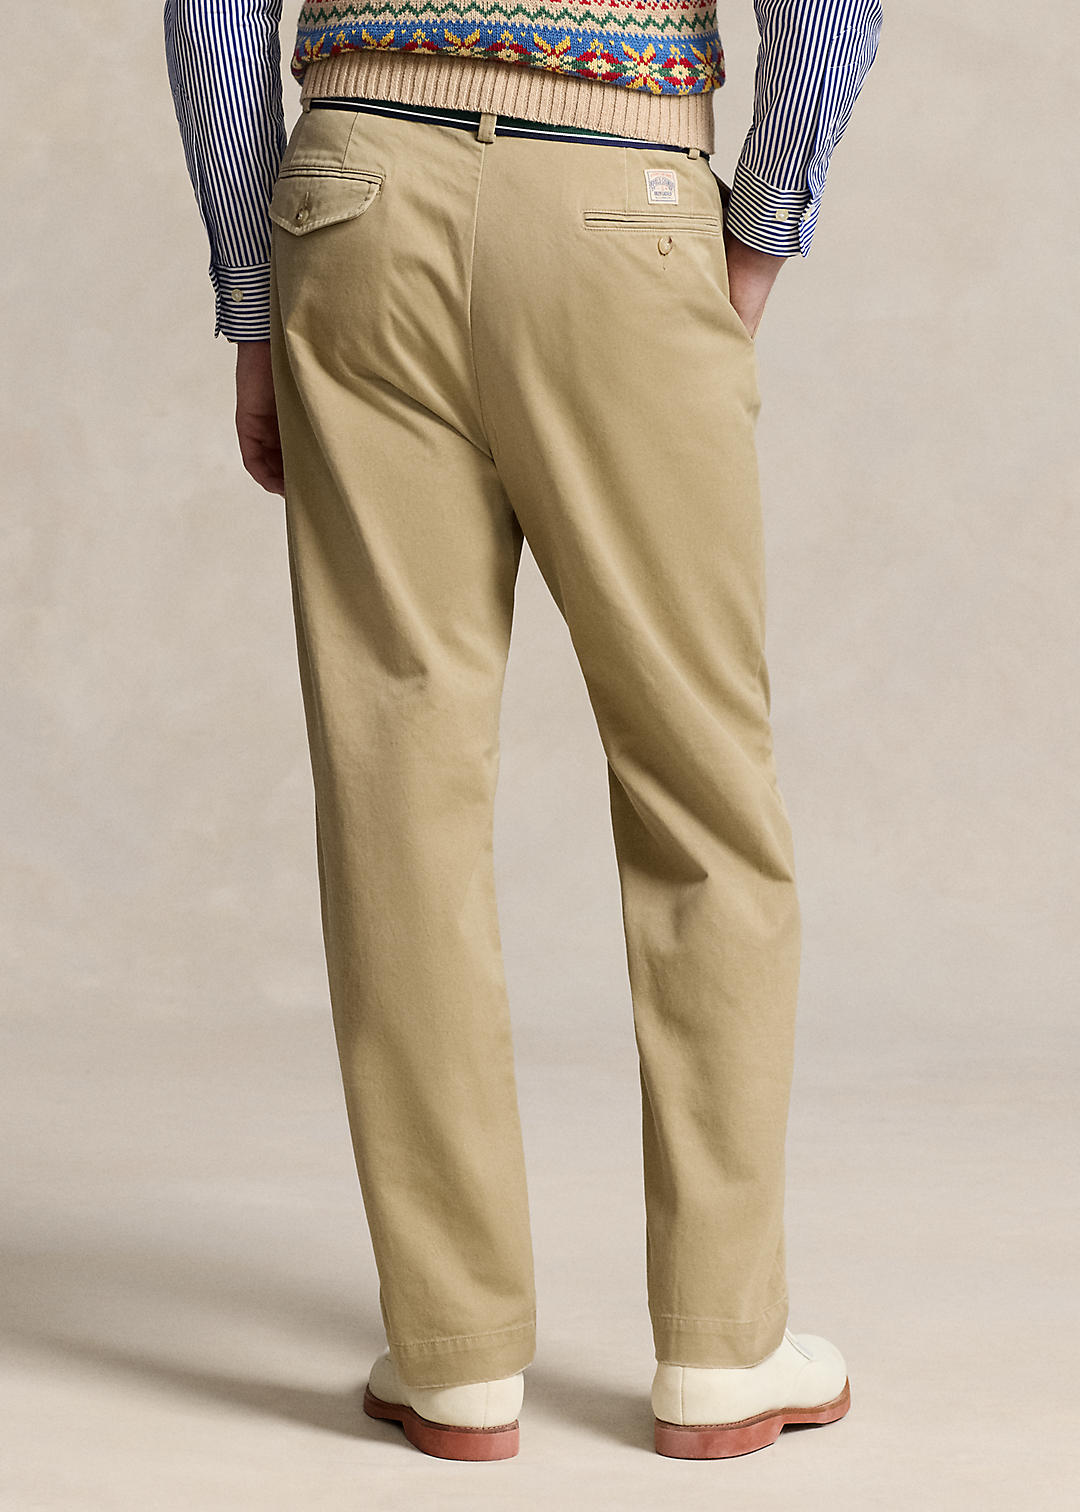 Polo Ralph Lauren Whitman Relaxed Fit Pleated Chino Trouser 4